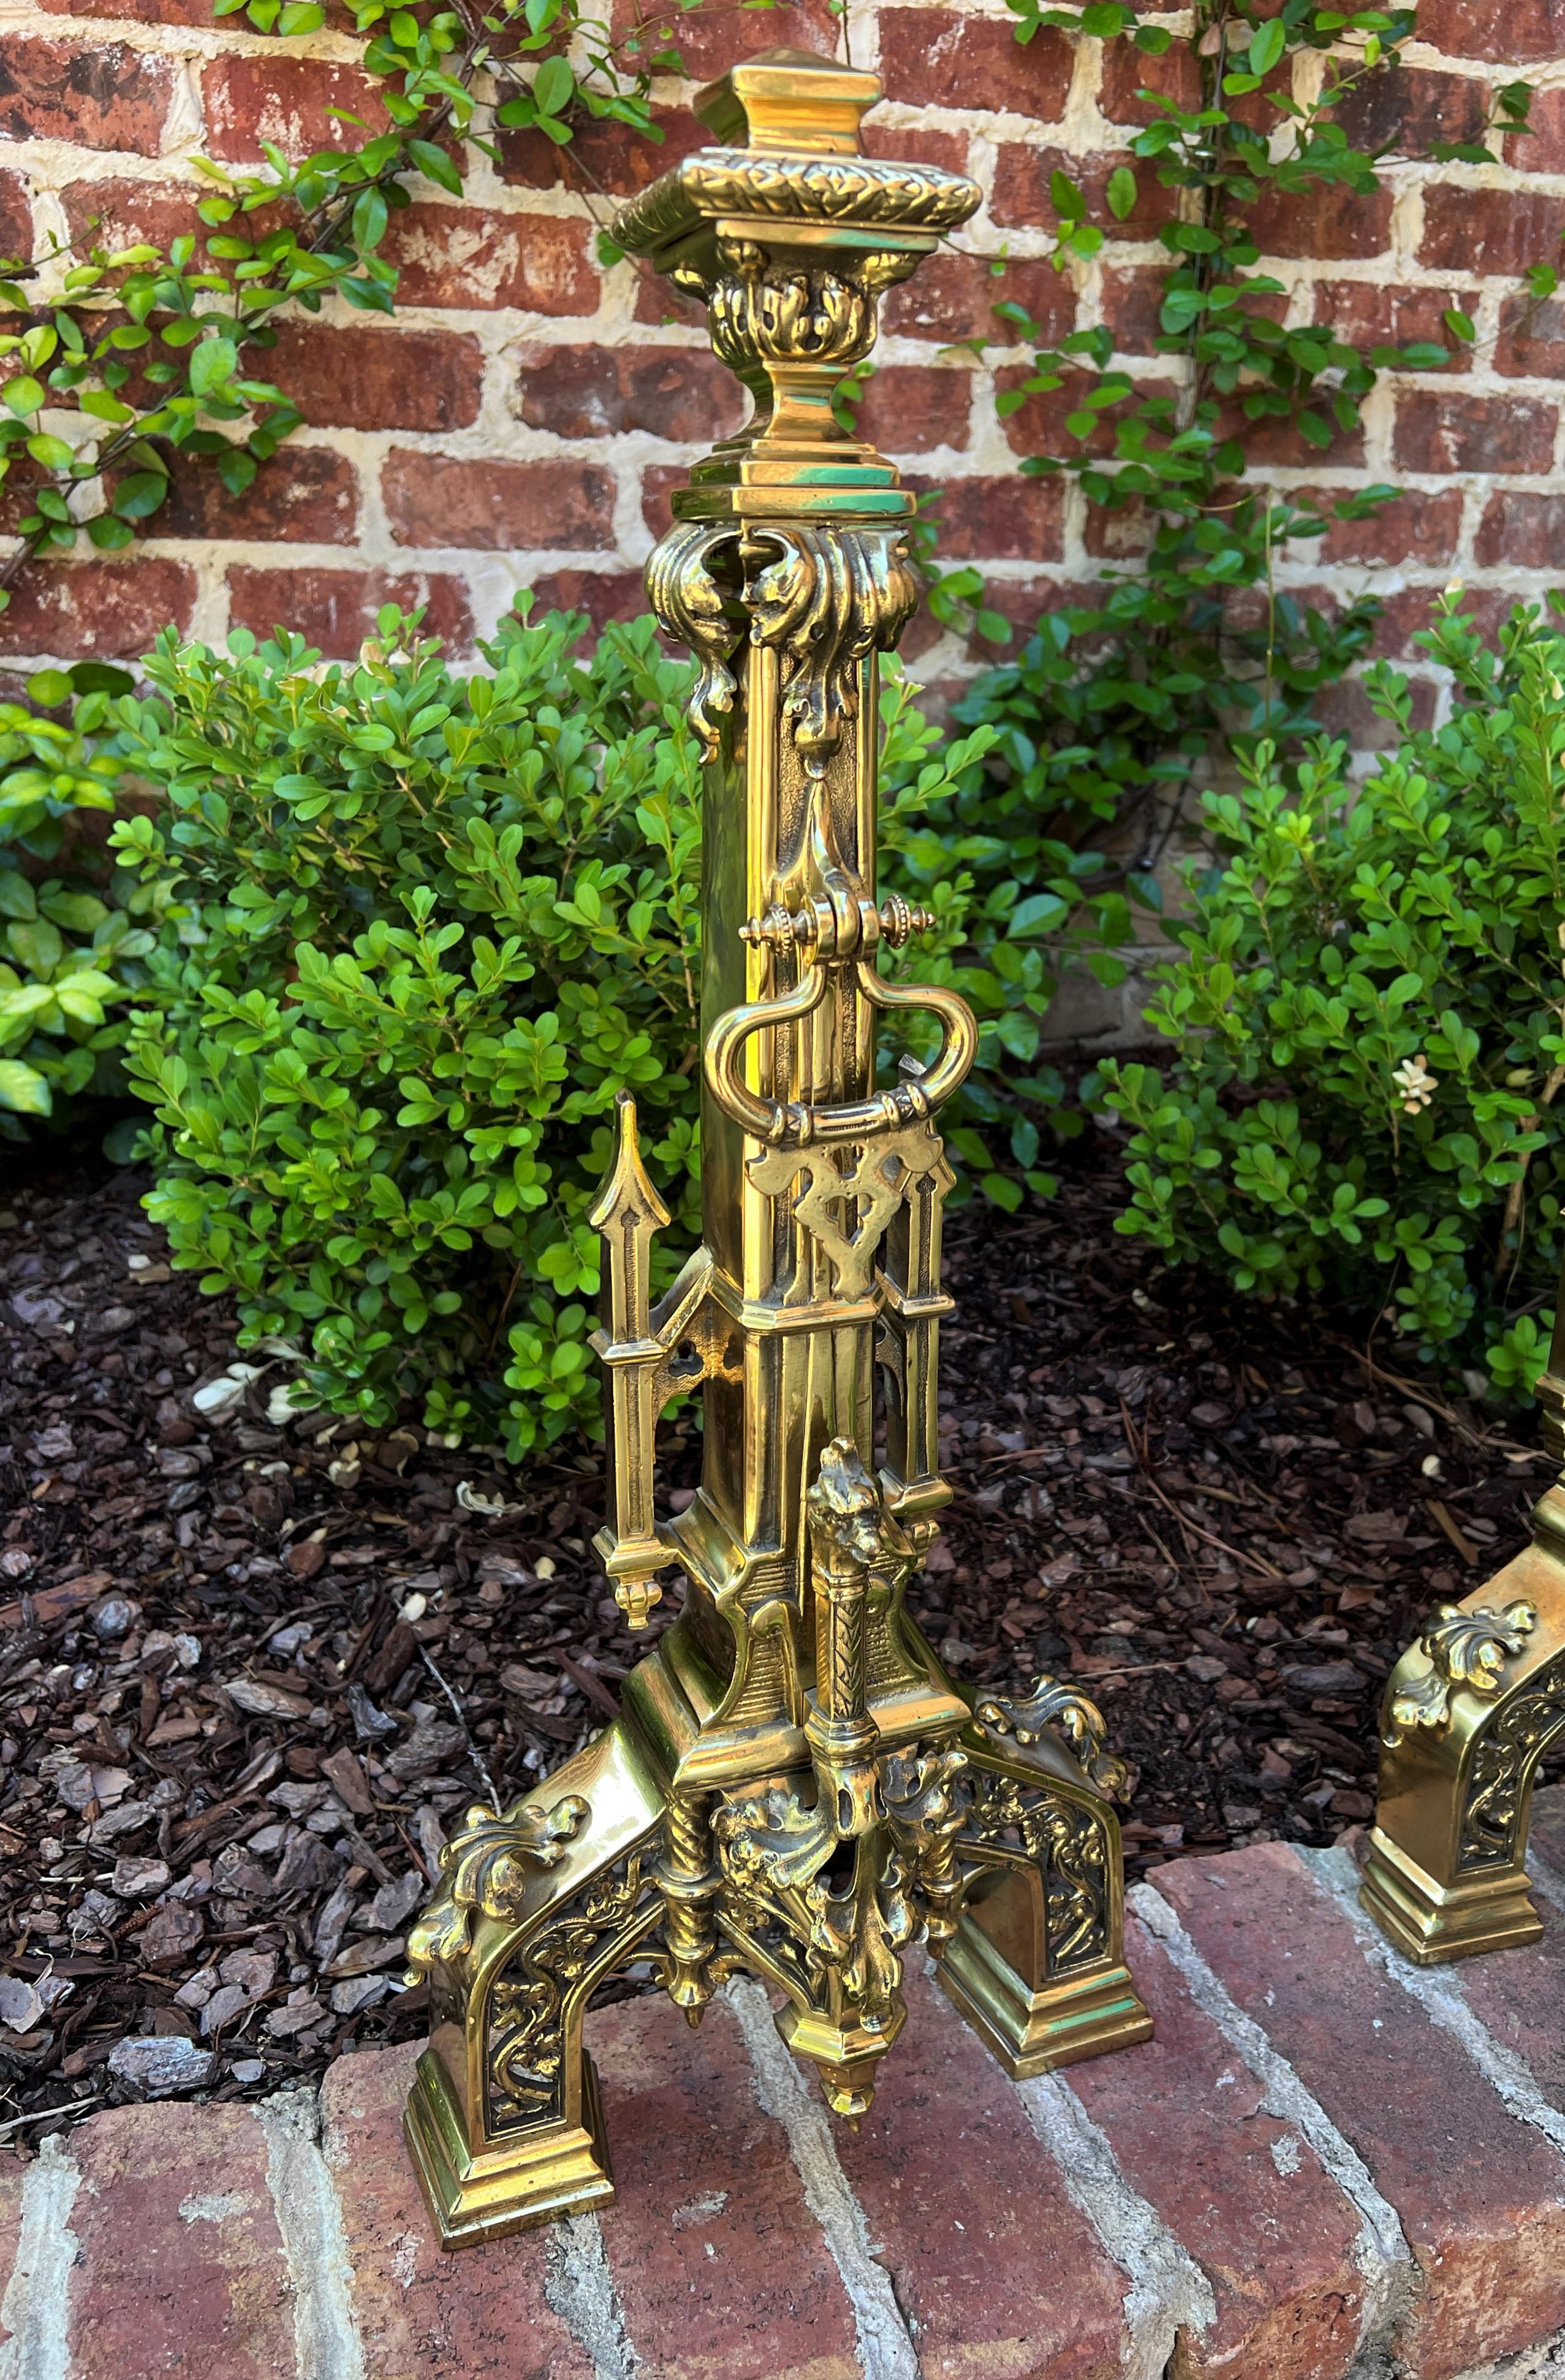 Antique French Gothic revival pair of brass andirons with bird masks~~Fireplace~~c. late 19th century

Traditional old world charm

 Measures: 26